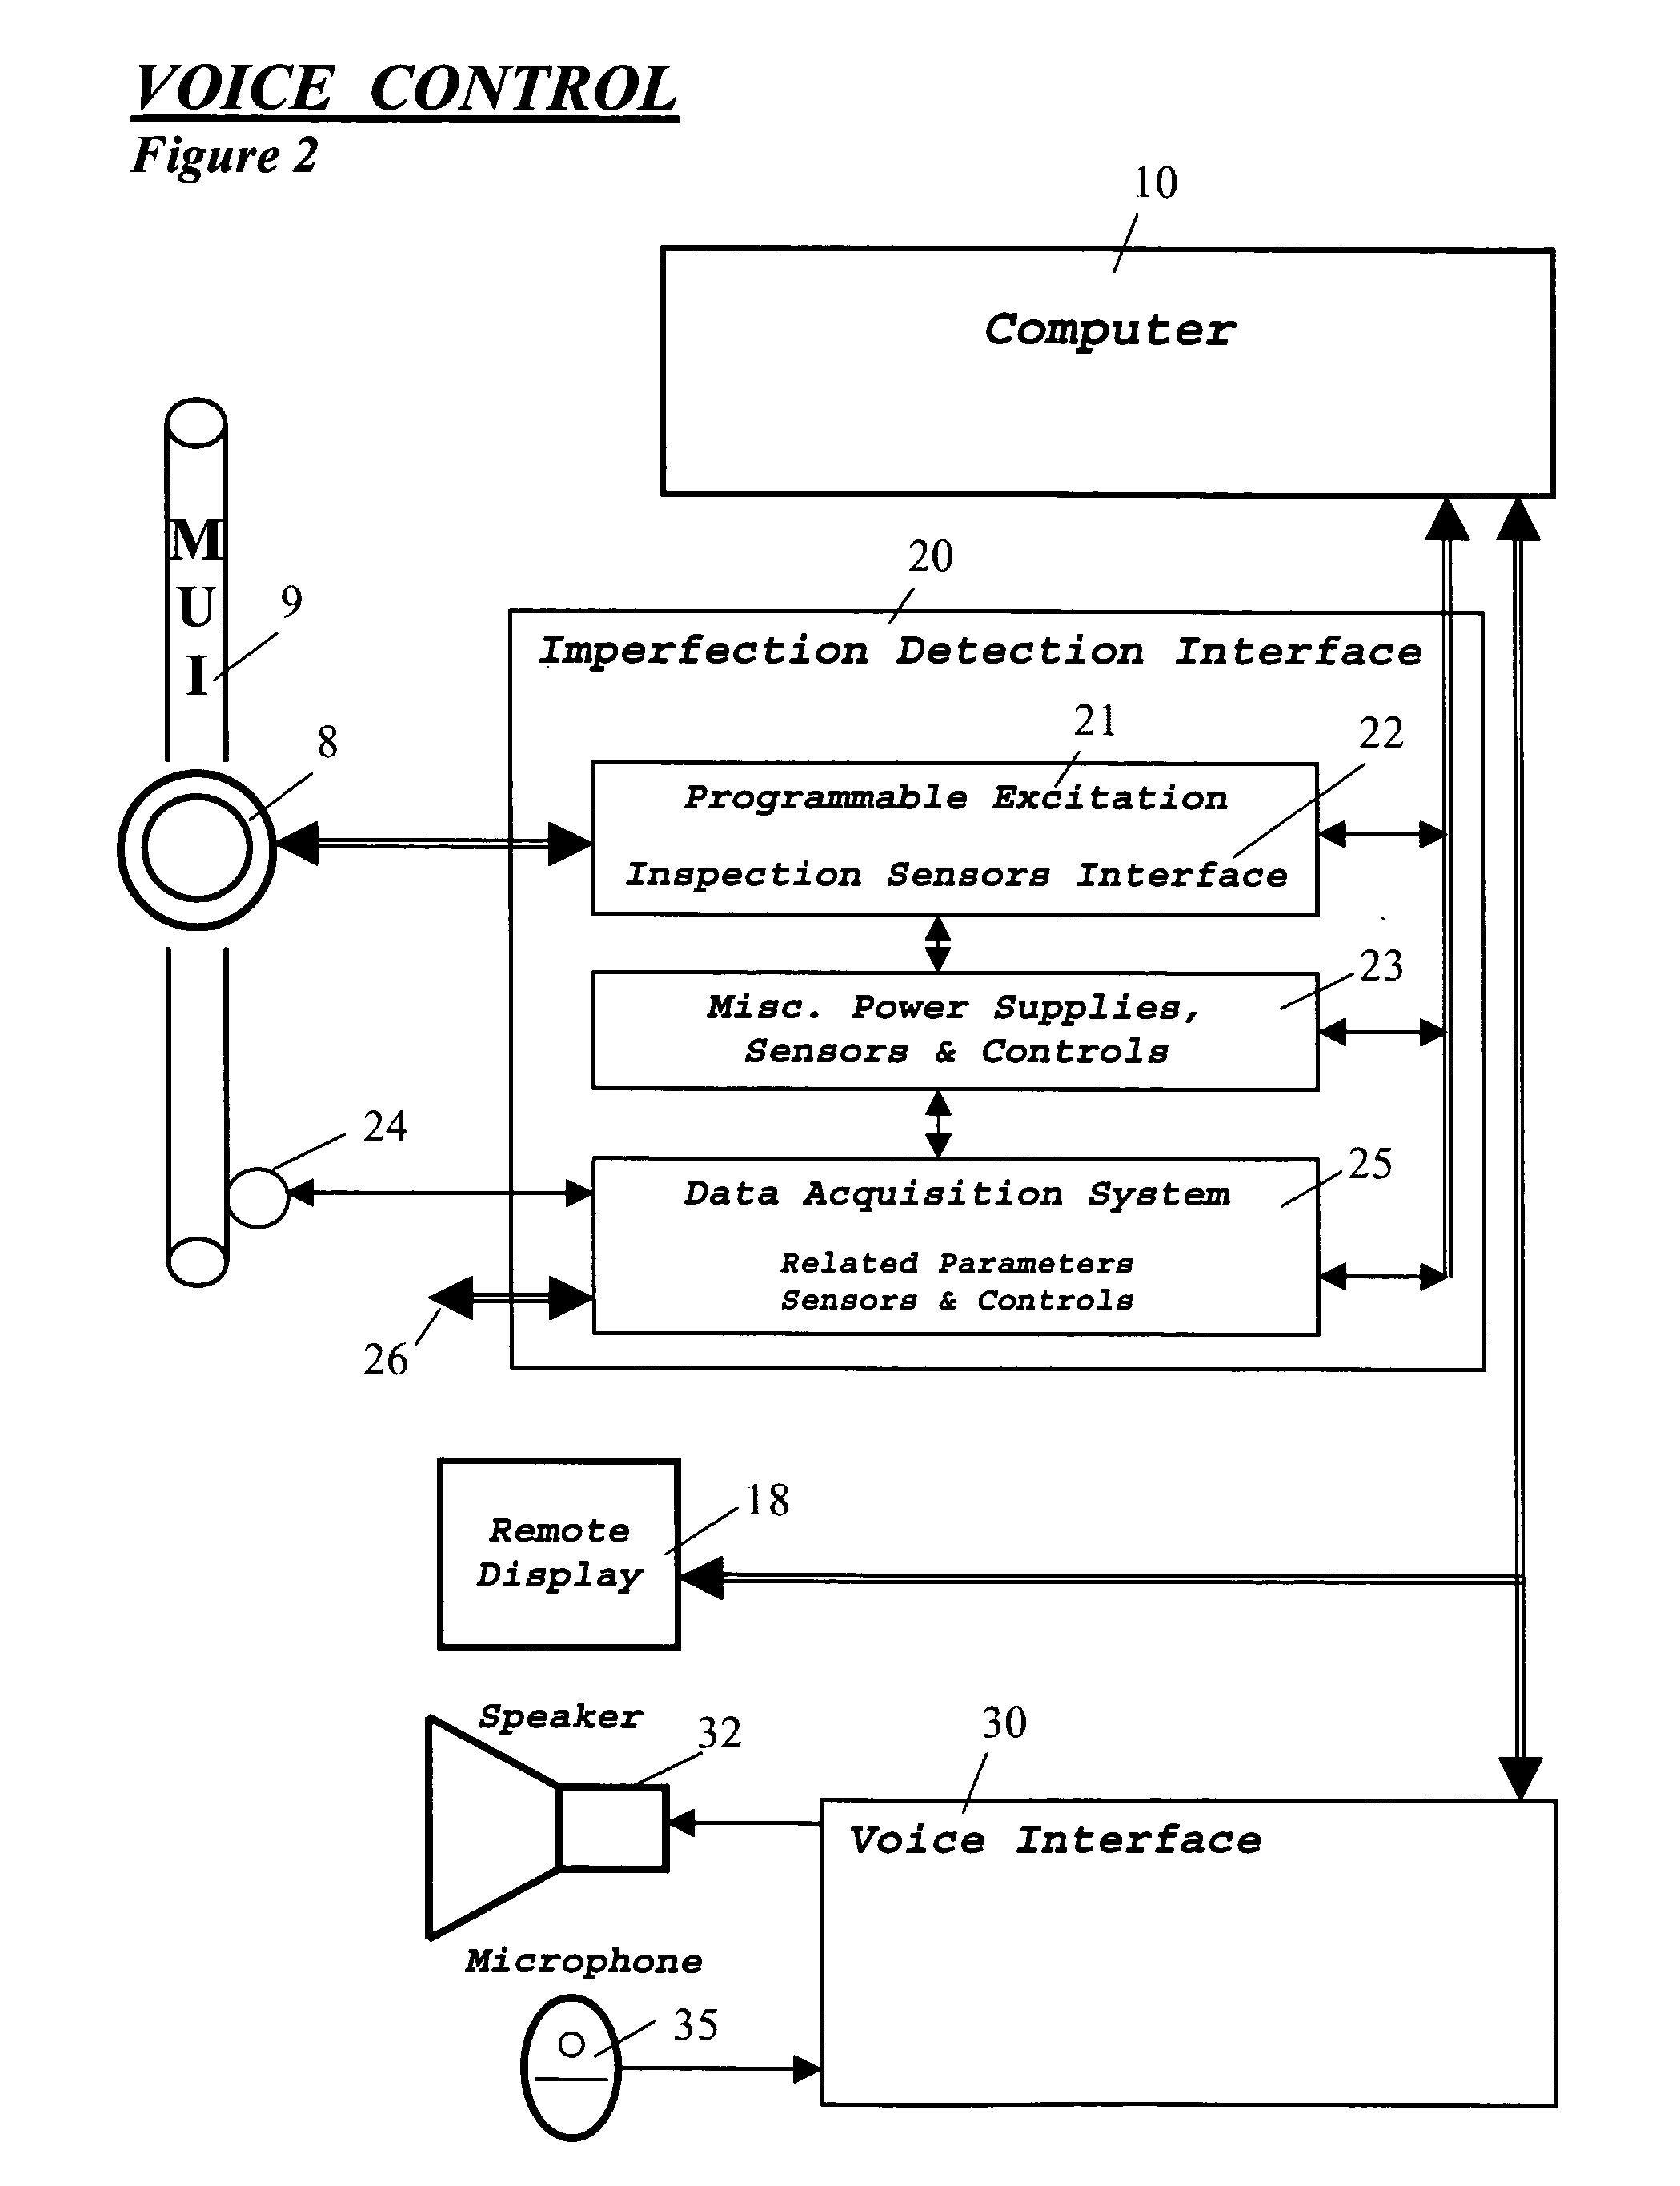 Voice interaction with and control of inspection equipment